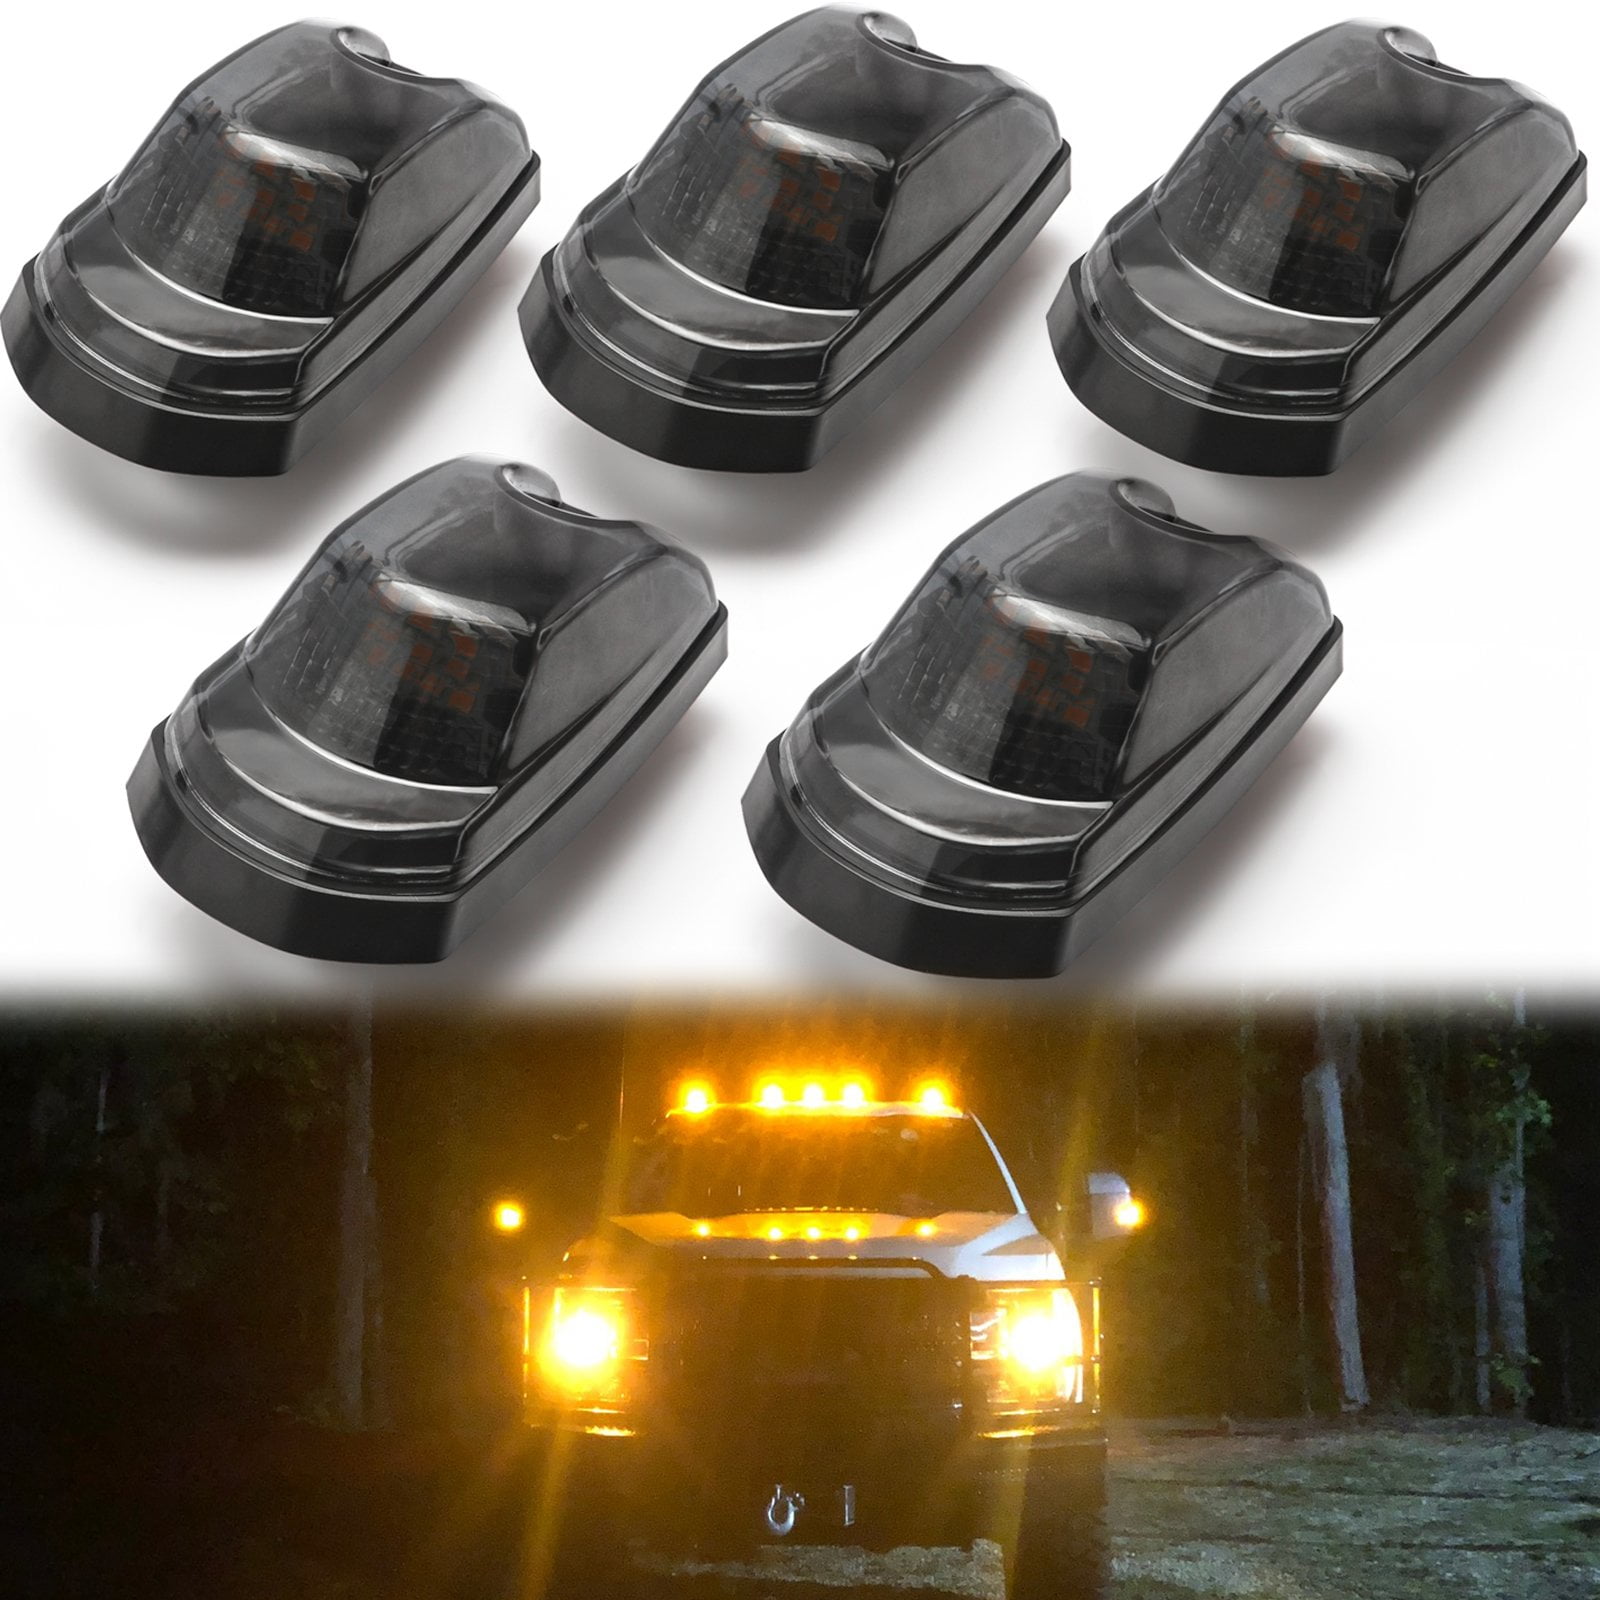 Partsam 5PCS Smoke Lens Amber LED Cab Roof Top Marker Lamps Running Lights Assembly Compatible with Ford F250 F350 F450 F550 Super Duty 1999-2016/E350 E450 2017 2018 Super Duty Pickup Truck 